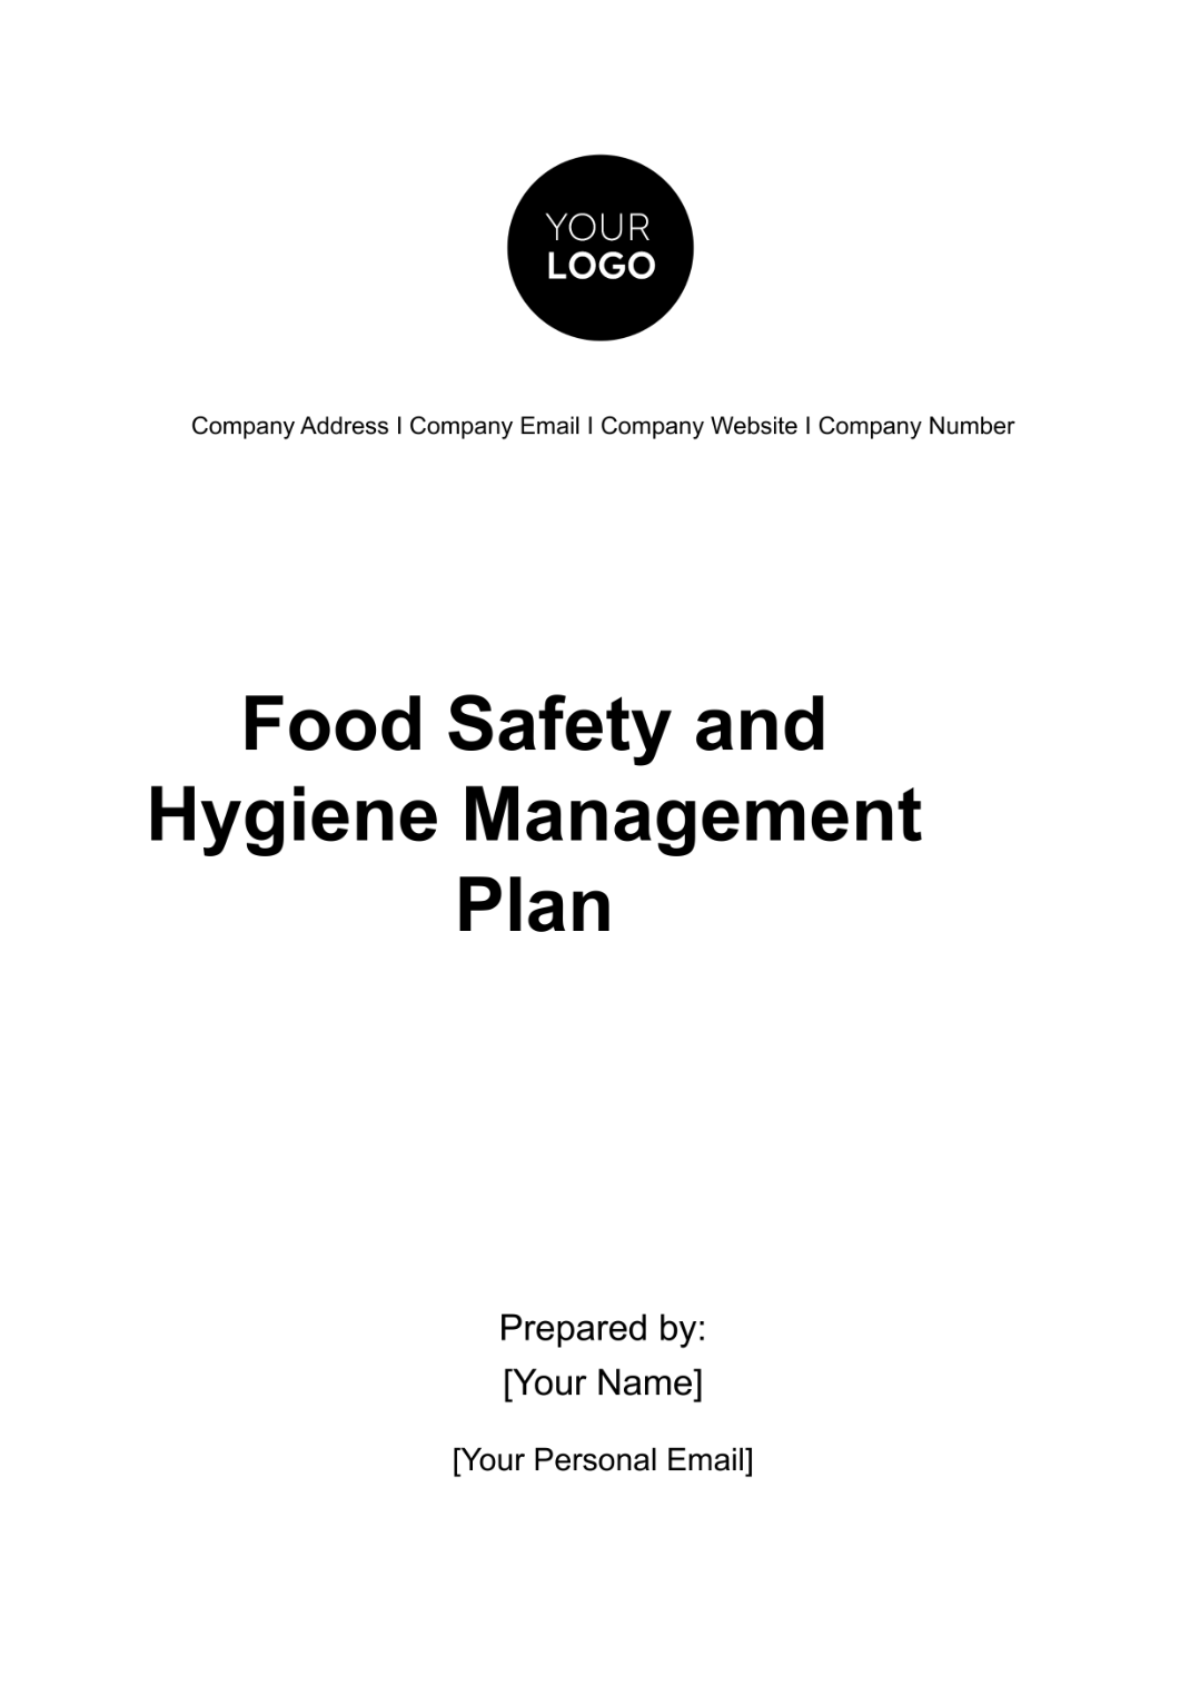 Food Safety and Hygiene Management Plan HR Template